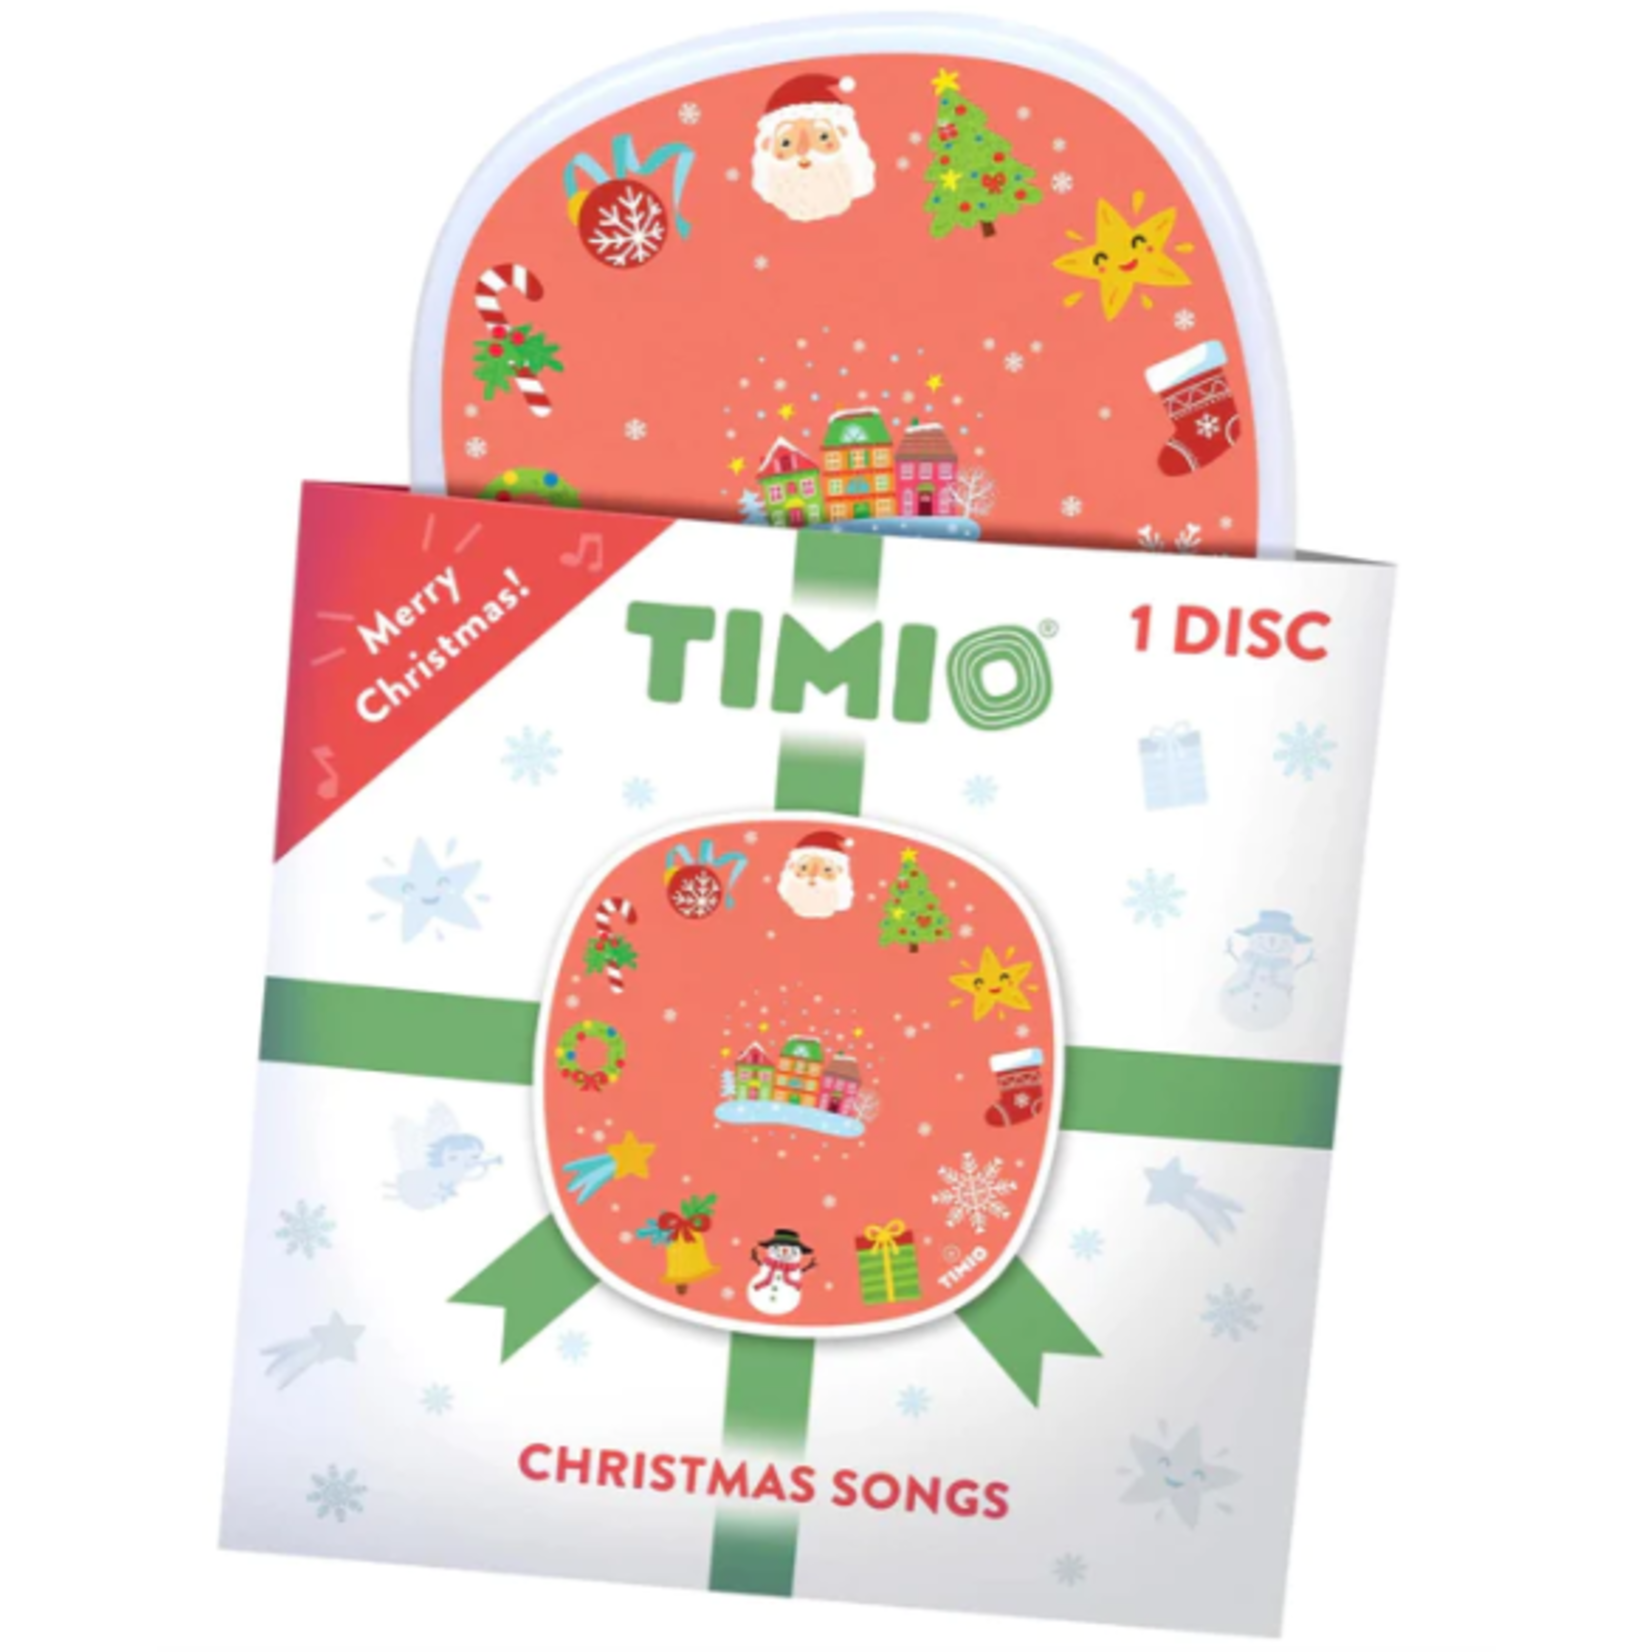 Timio CHRISTMAS SONGS DISC